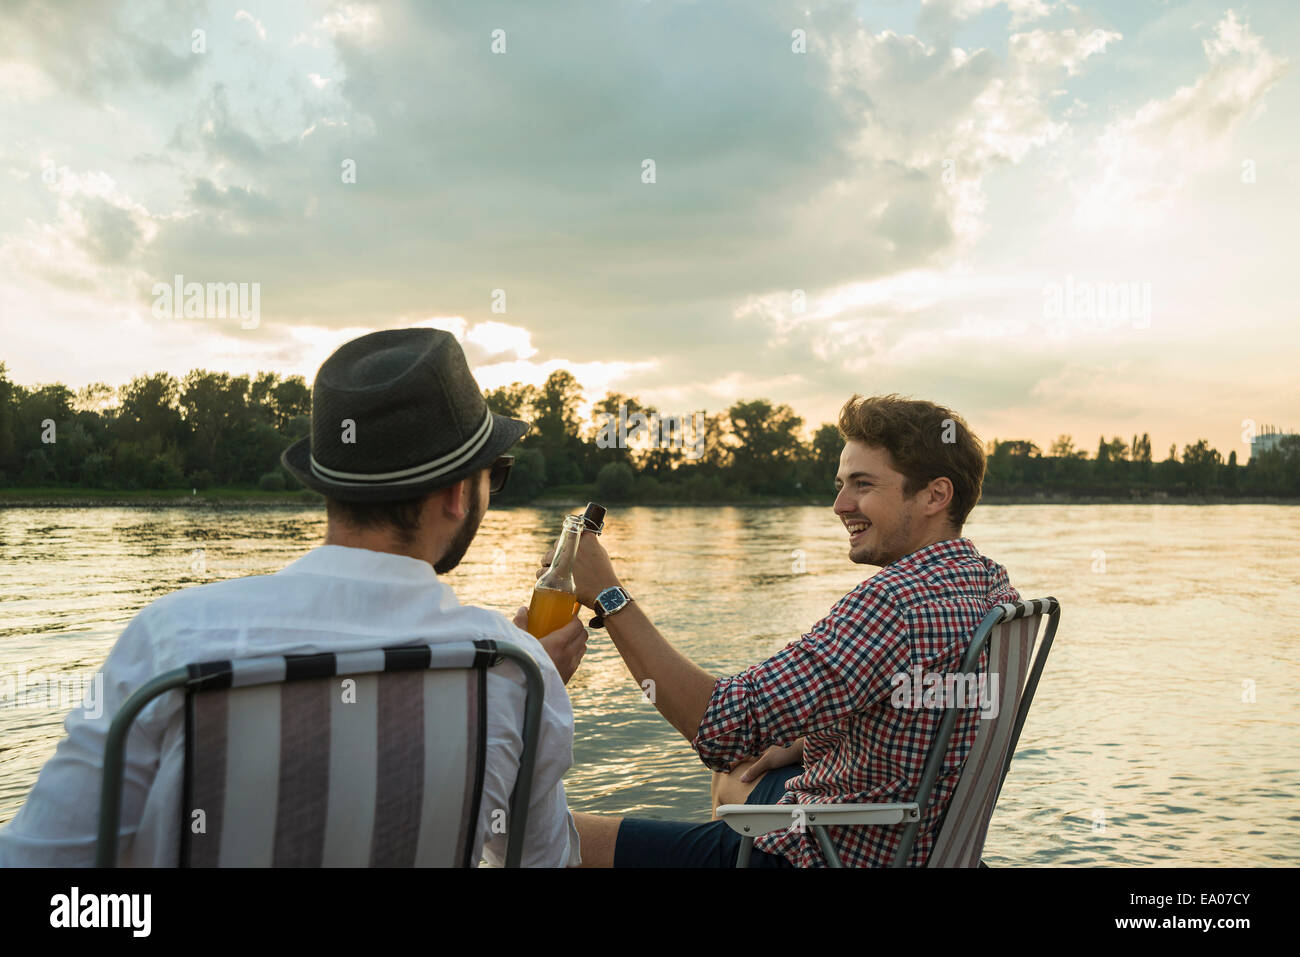 Young men toasting with beer bottles by lake Stock Photo